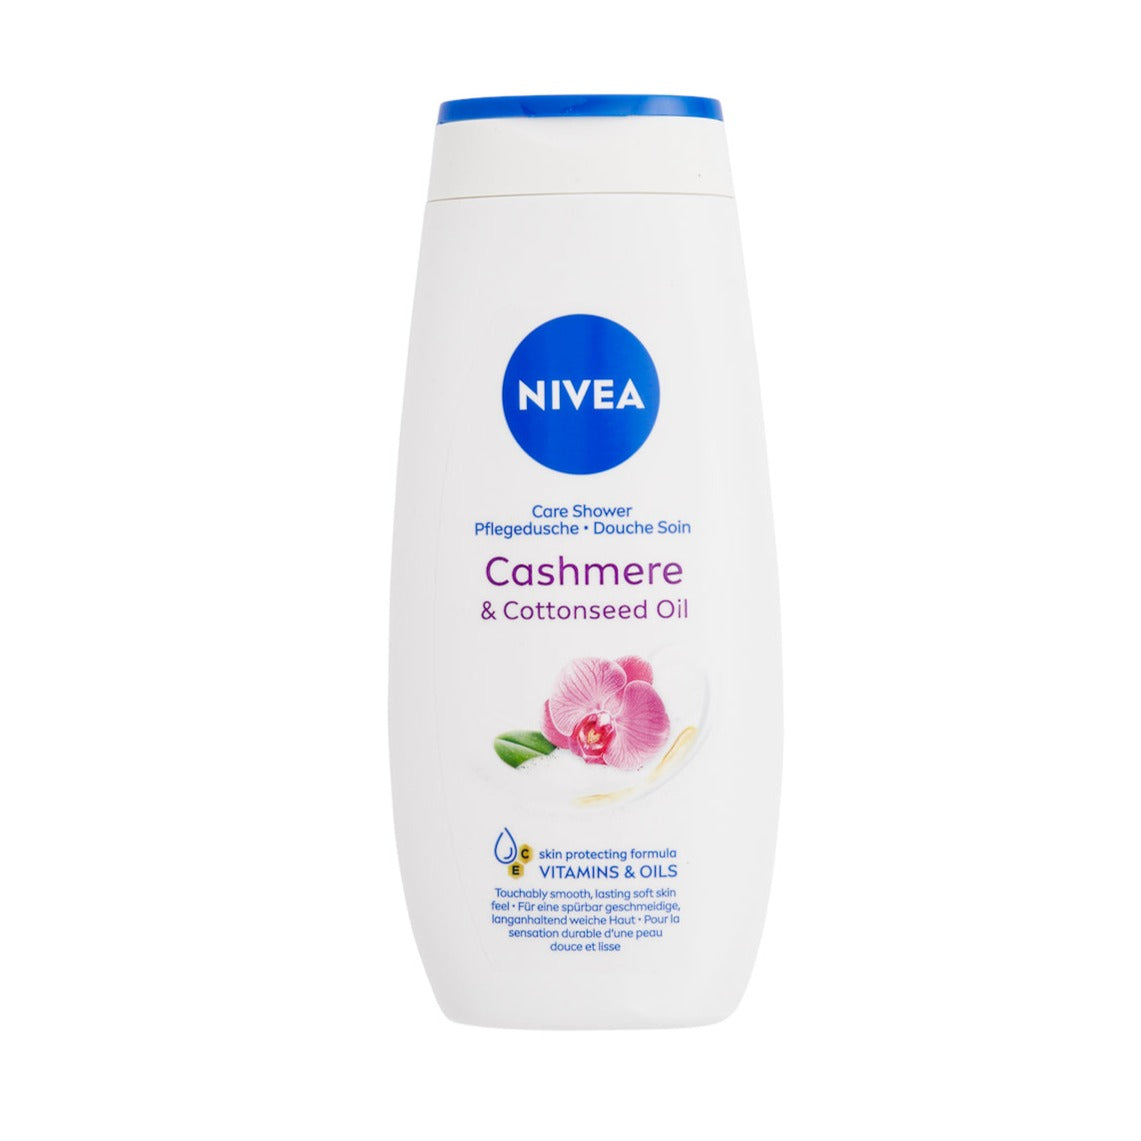 NIVEA - Caring Shower Cream - Cashmere & Cottonseed Oil - 250ml